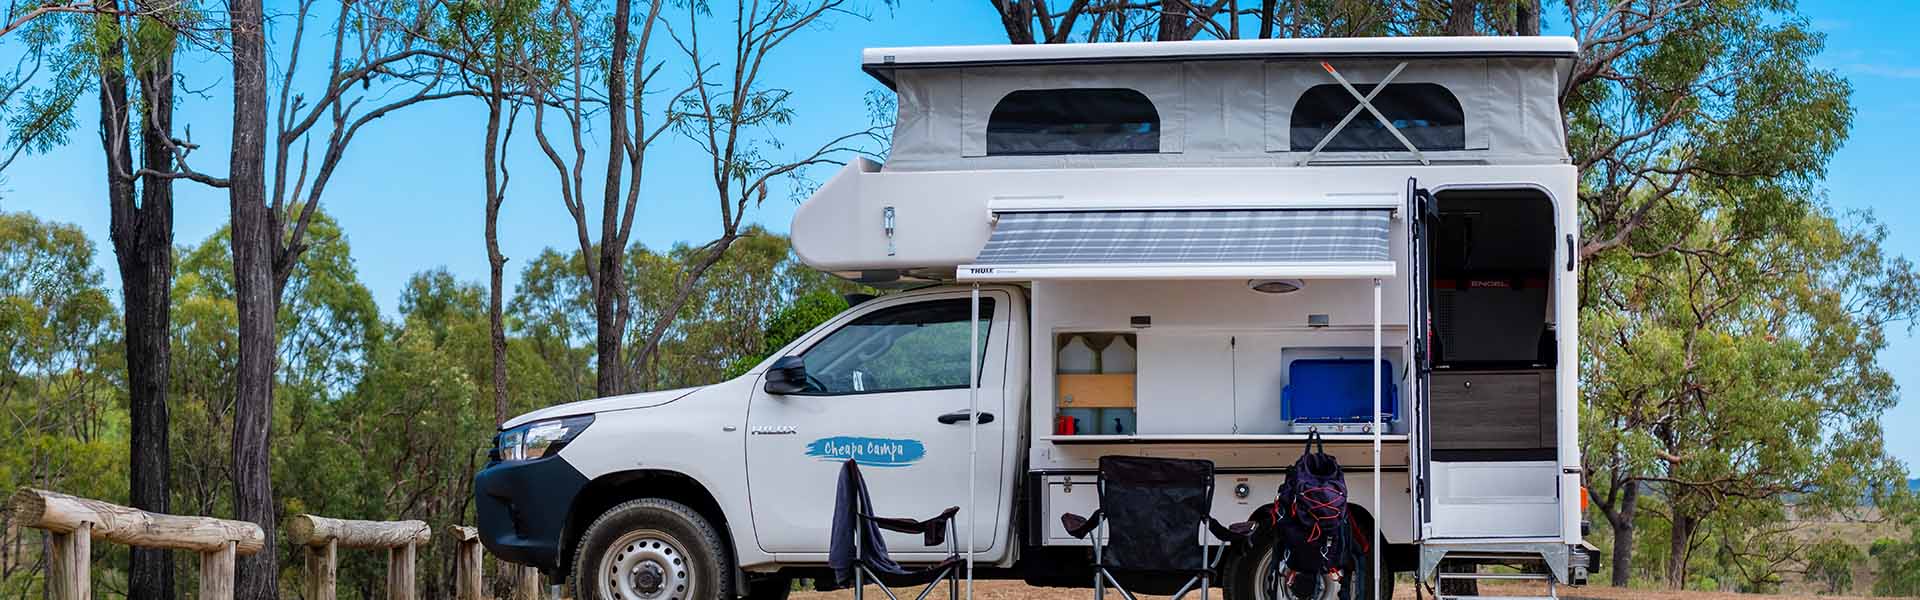 Cheapa 4WD Campa set up for camping